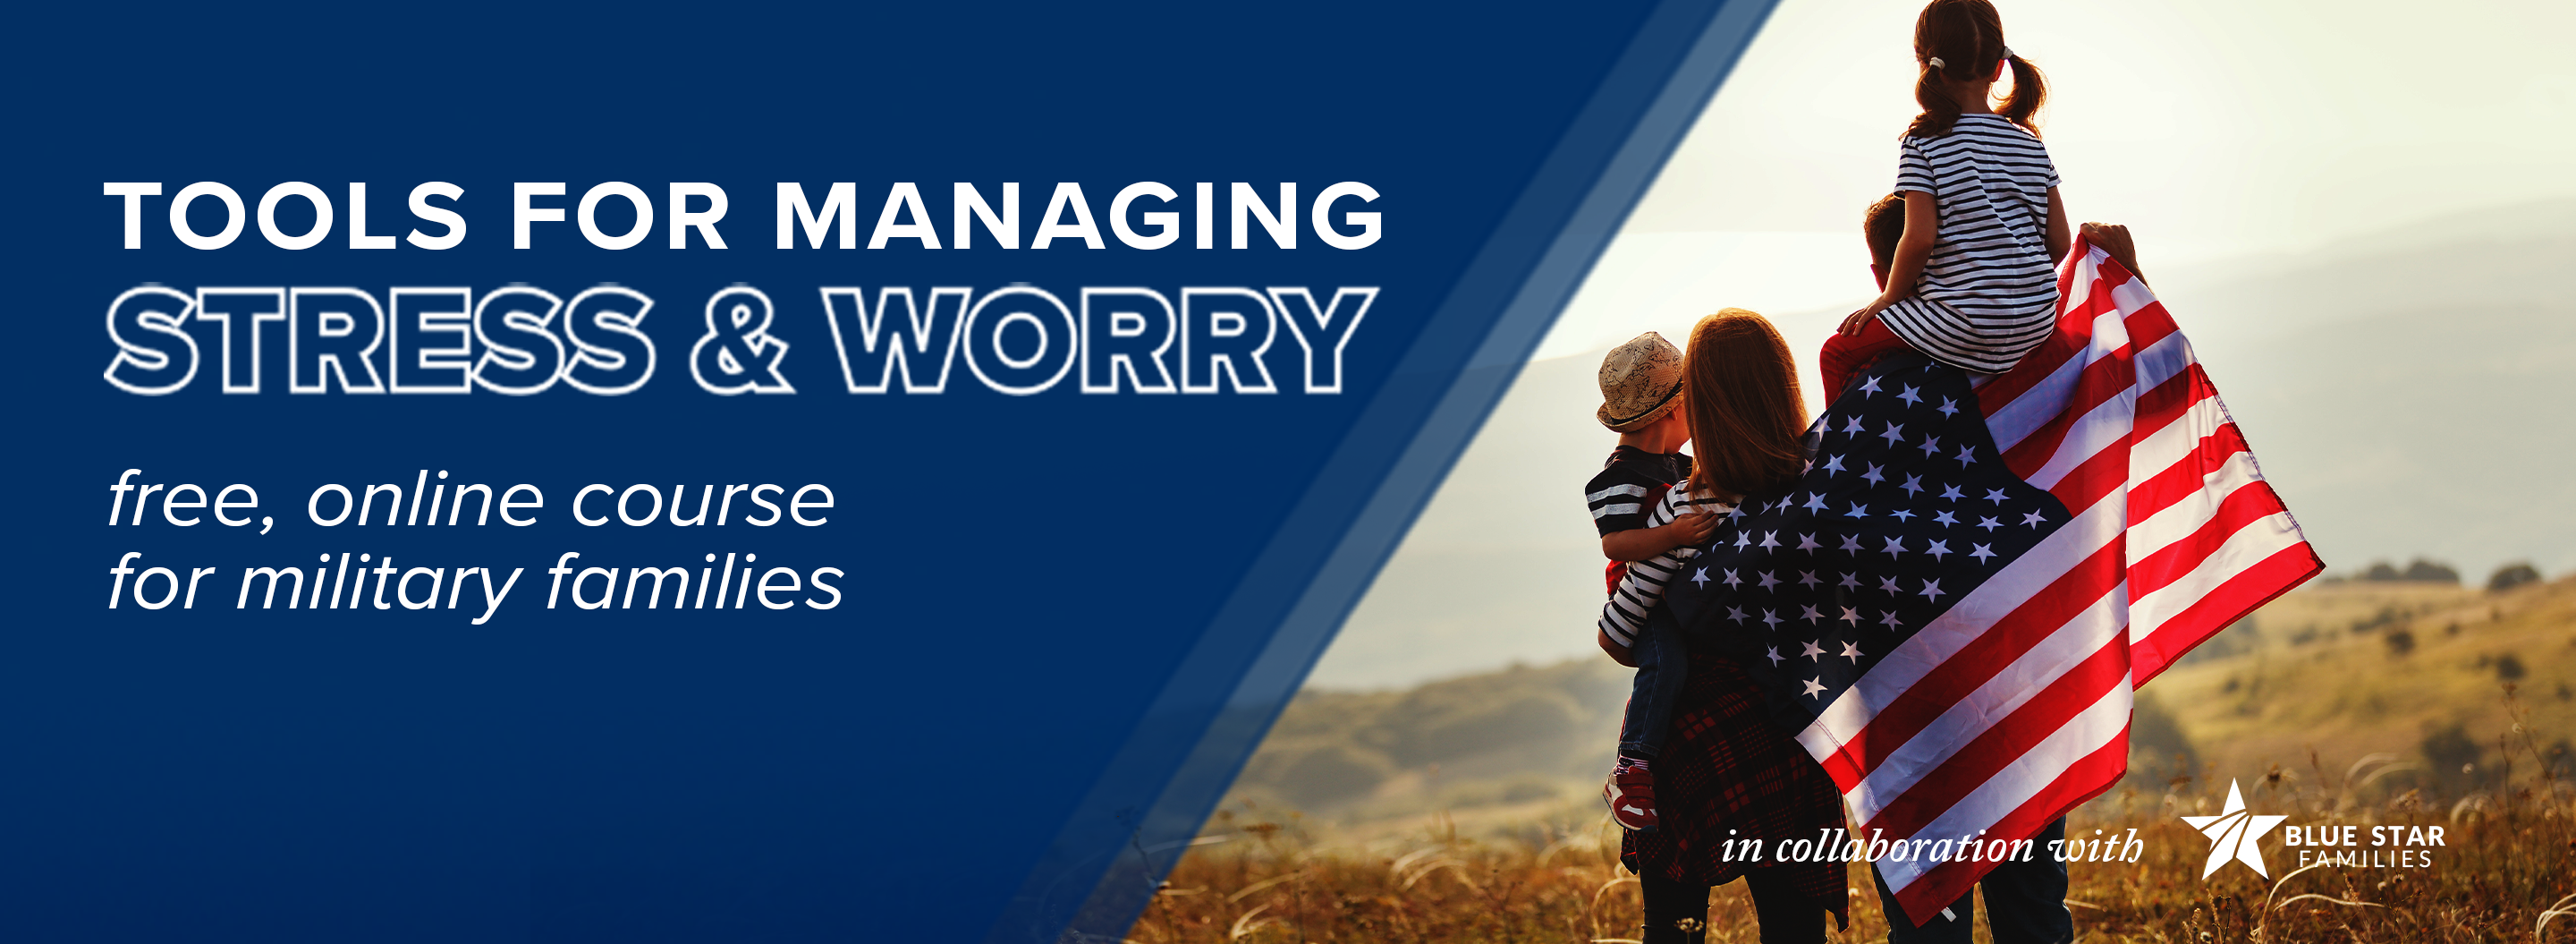 Tools for Stress and Worry - Cohen Veterans Network